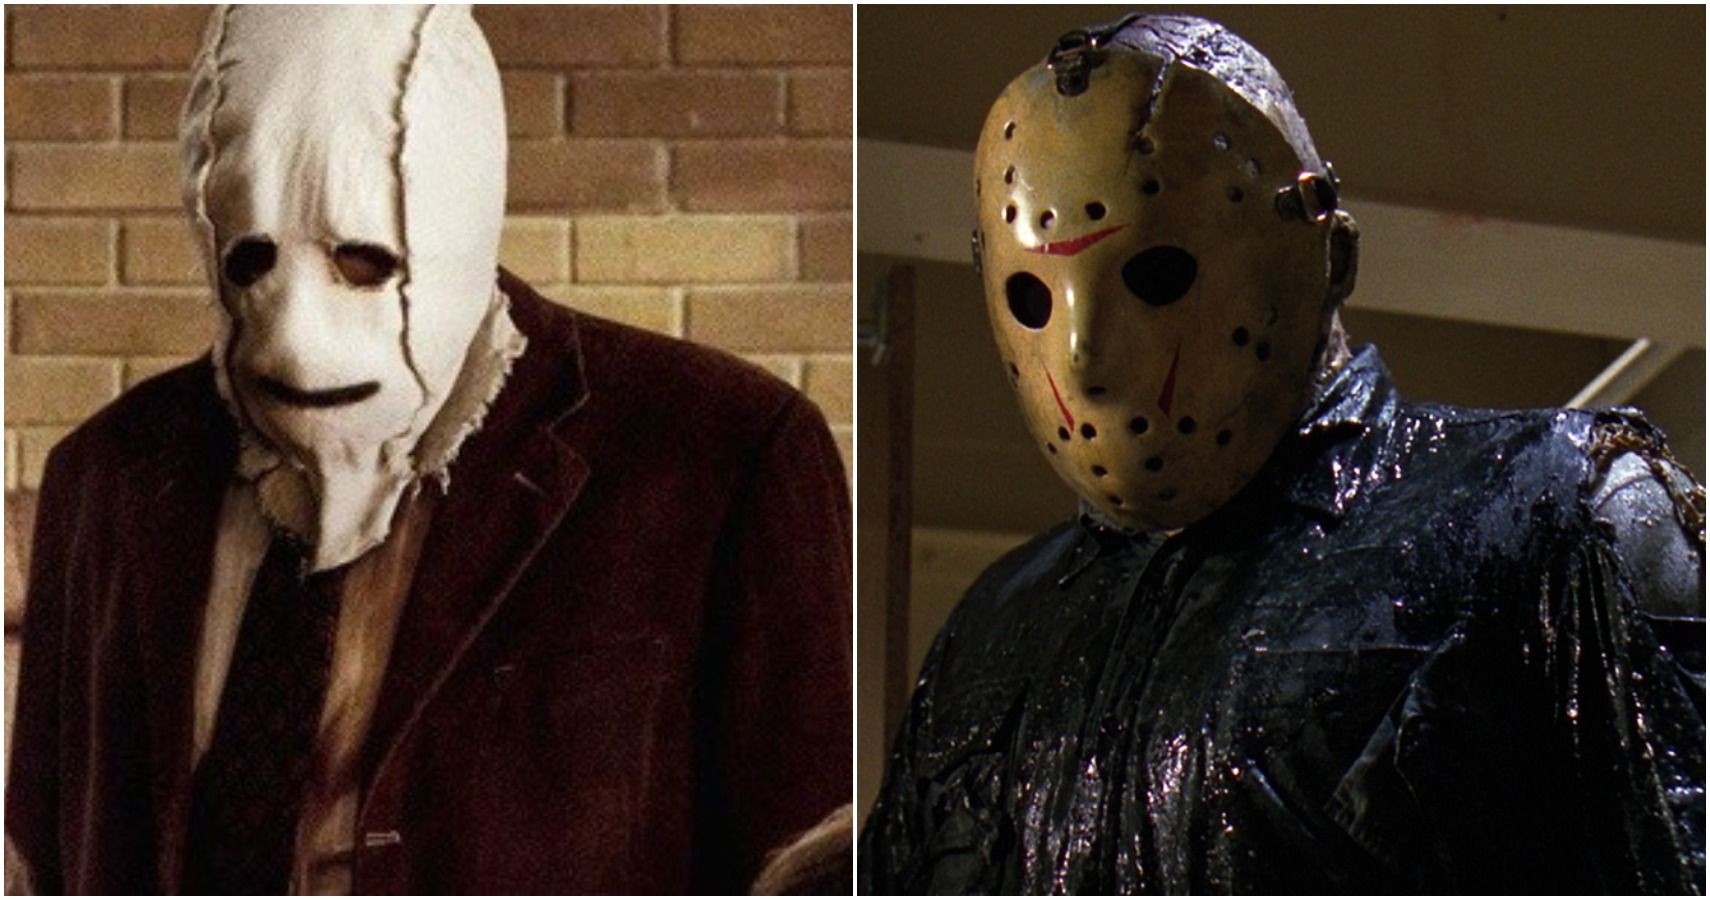 Of The Scariest Masked Horror Movie Maniacs Ranked